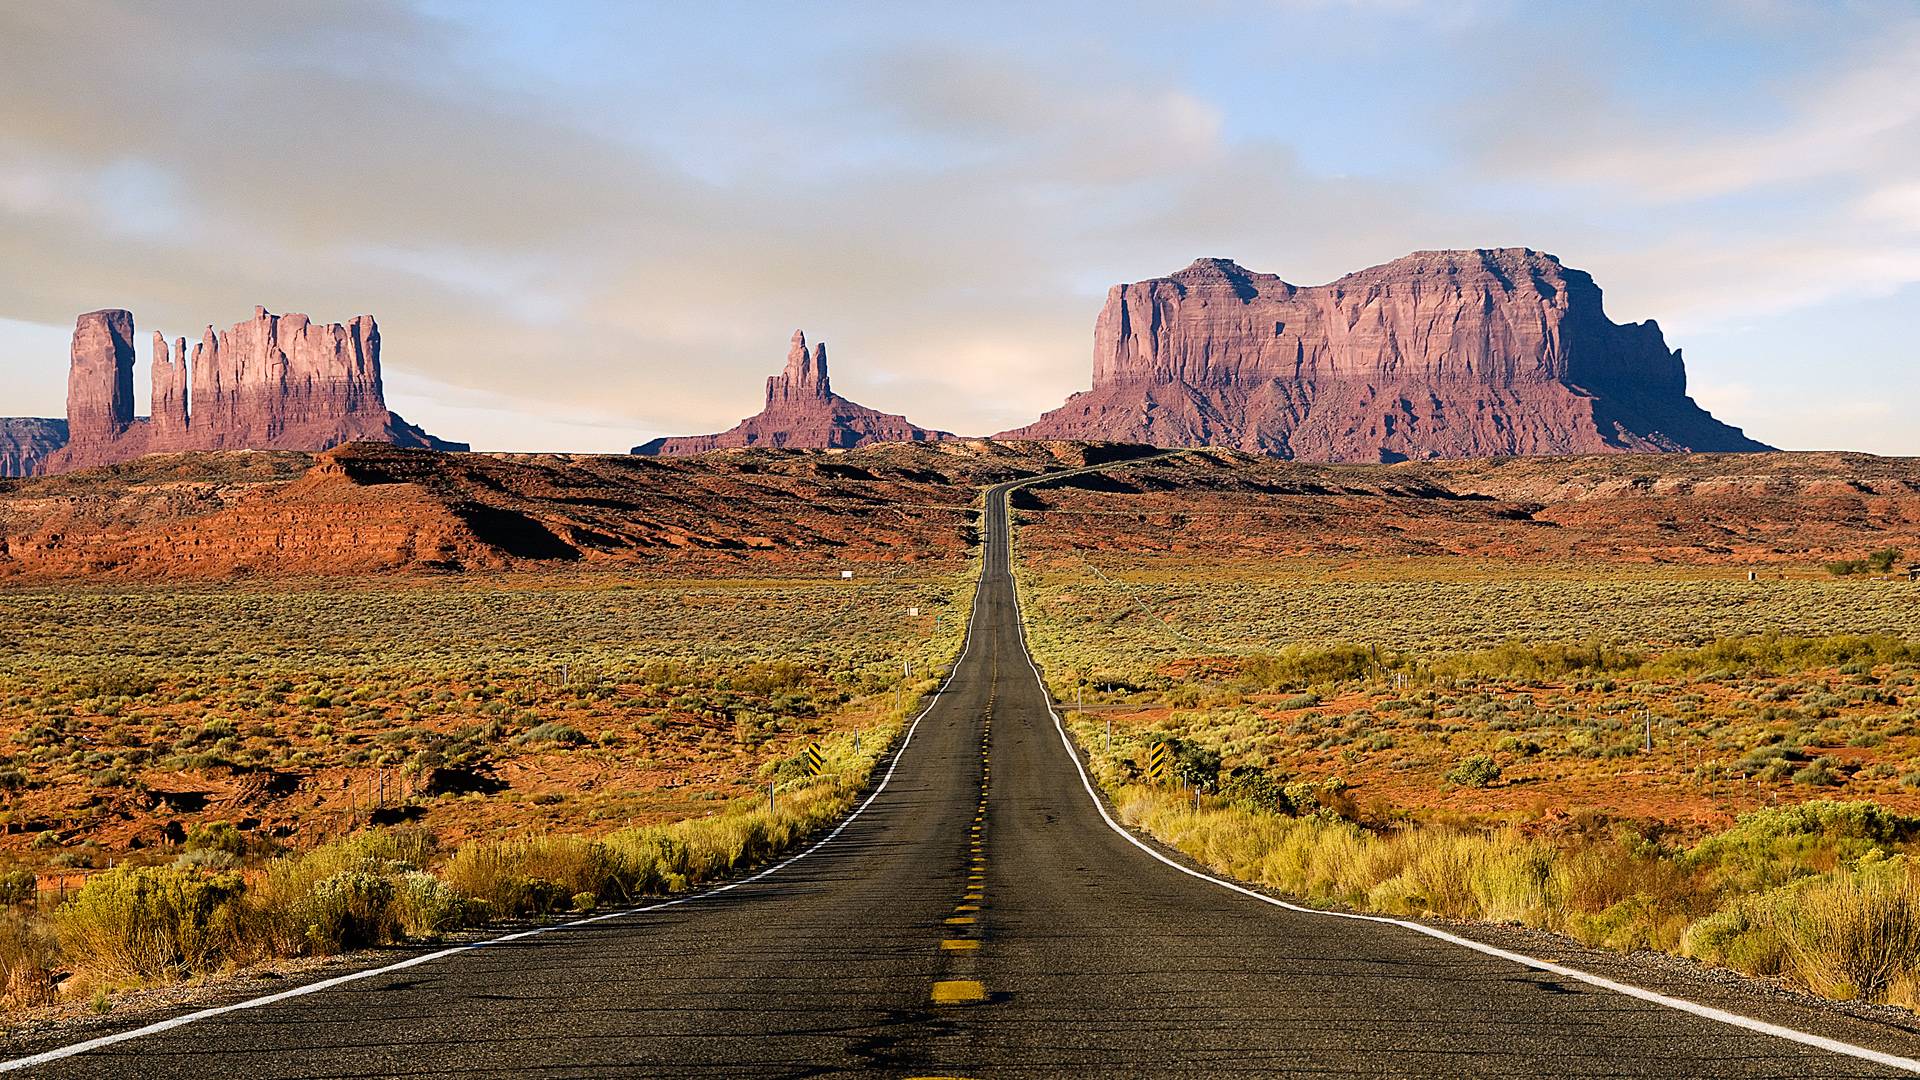 Free Route 66 wallpaper. United States of America wallpaper